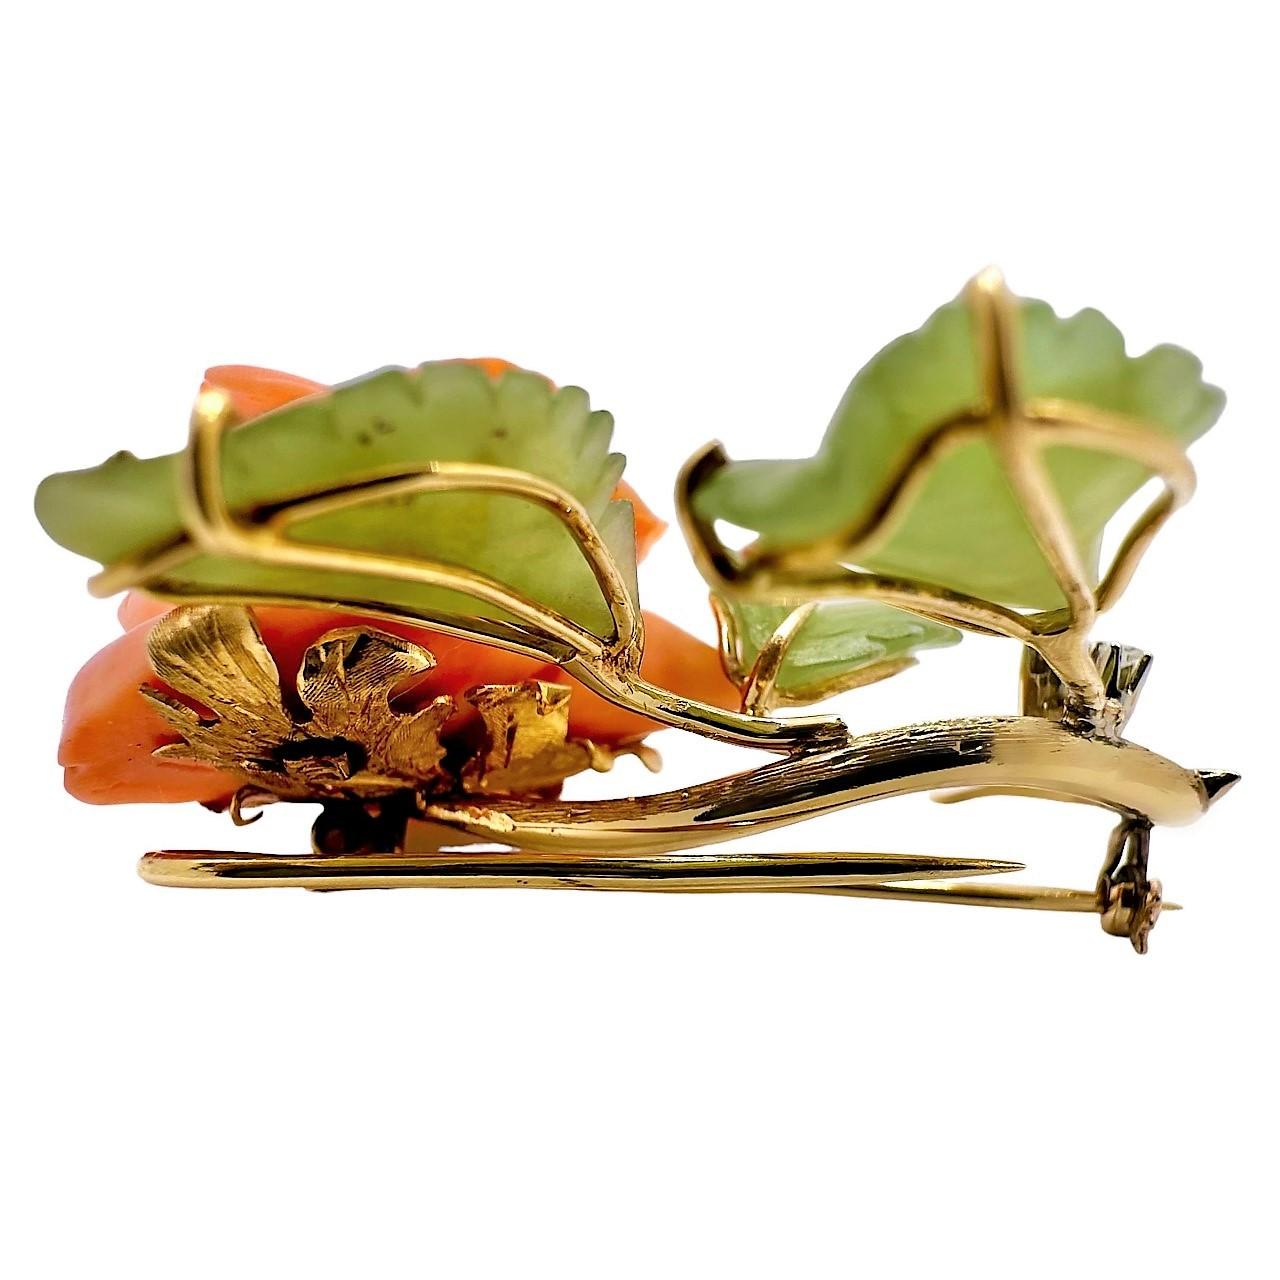 This beautifully executed and sentimental rose brooch has, as it's focal point, an intricately and life like Angel Skin Coral rose. The flower measures 1 1/4 inches by `1 1/4 inches and is cradled by three delicately carved Jade leaves. The stem and